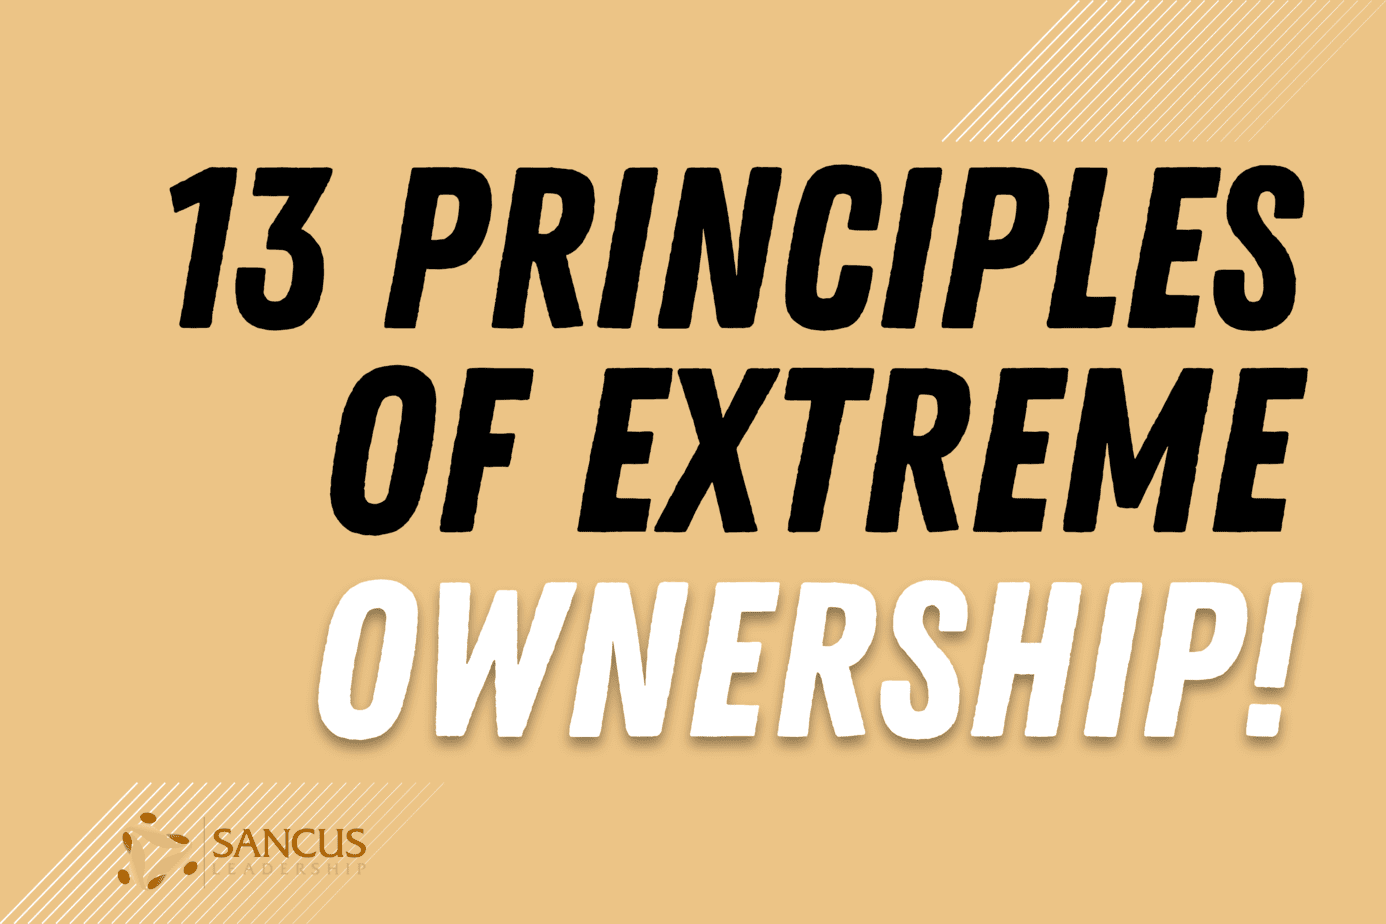 Extreme Ownership: 13 Lessons For Leaders and Managers!